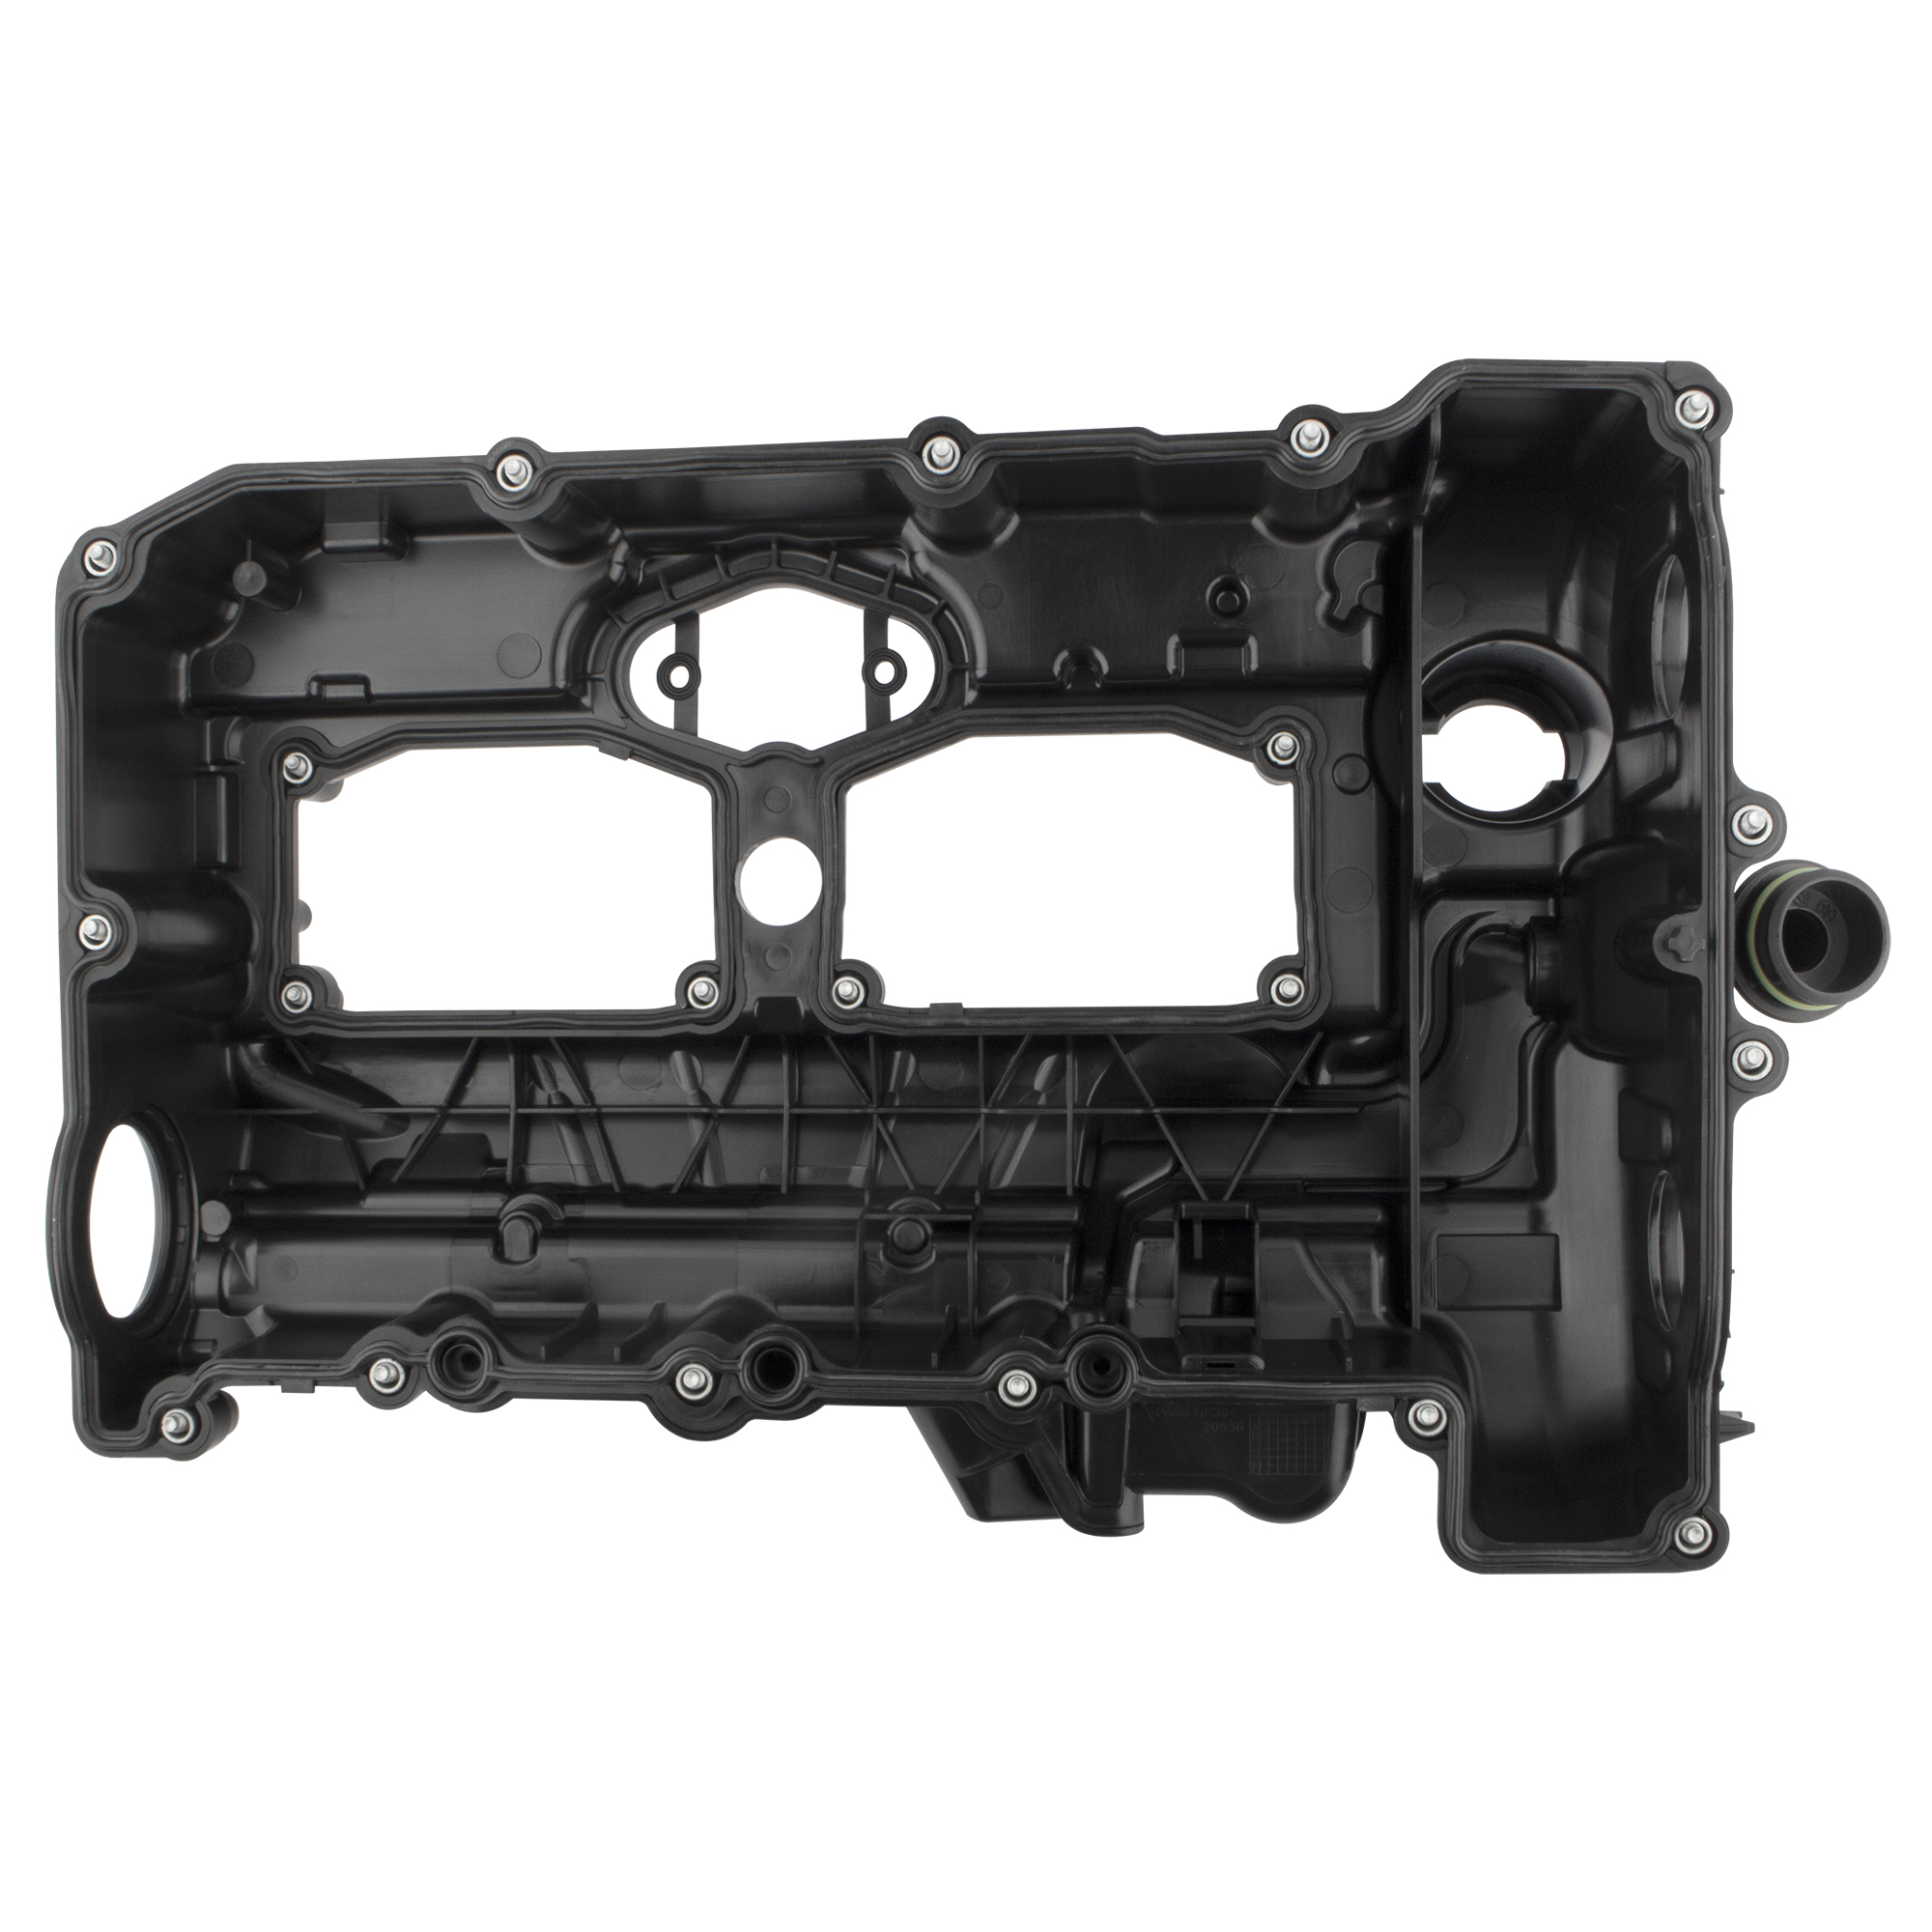 BOXI Engine Valve Cover Cylinder Head Cover With Bolts and Gasket for BMW  N20 228i 320i 328i 428i 528i xDrive X1 X3 X4 X5 Z4 2012-2018 2.0L L4  Replaces 11127588412